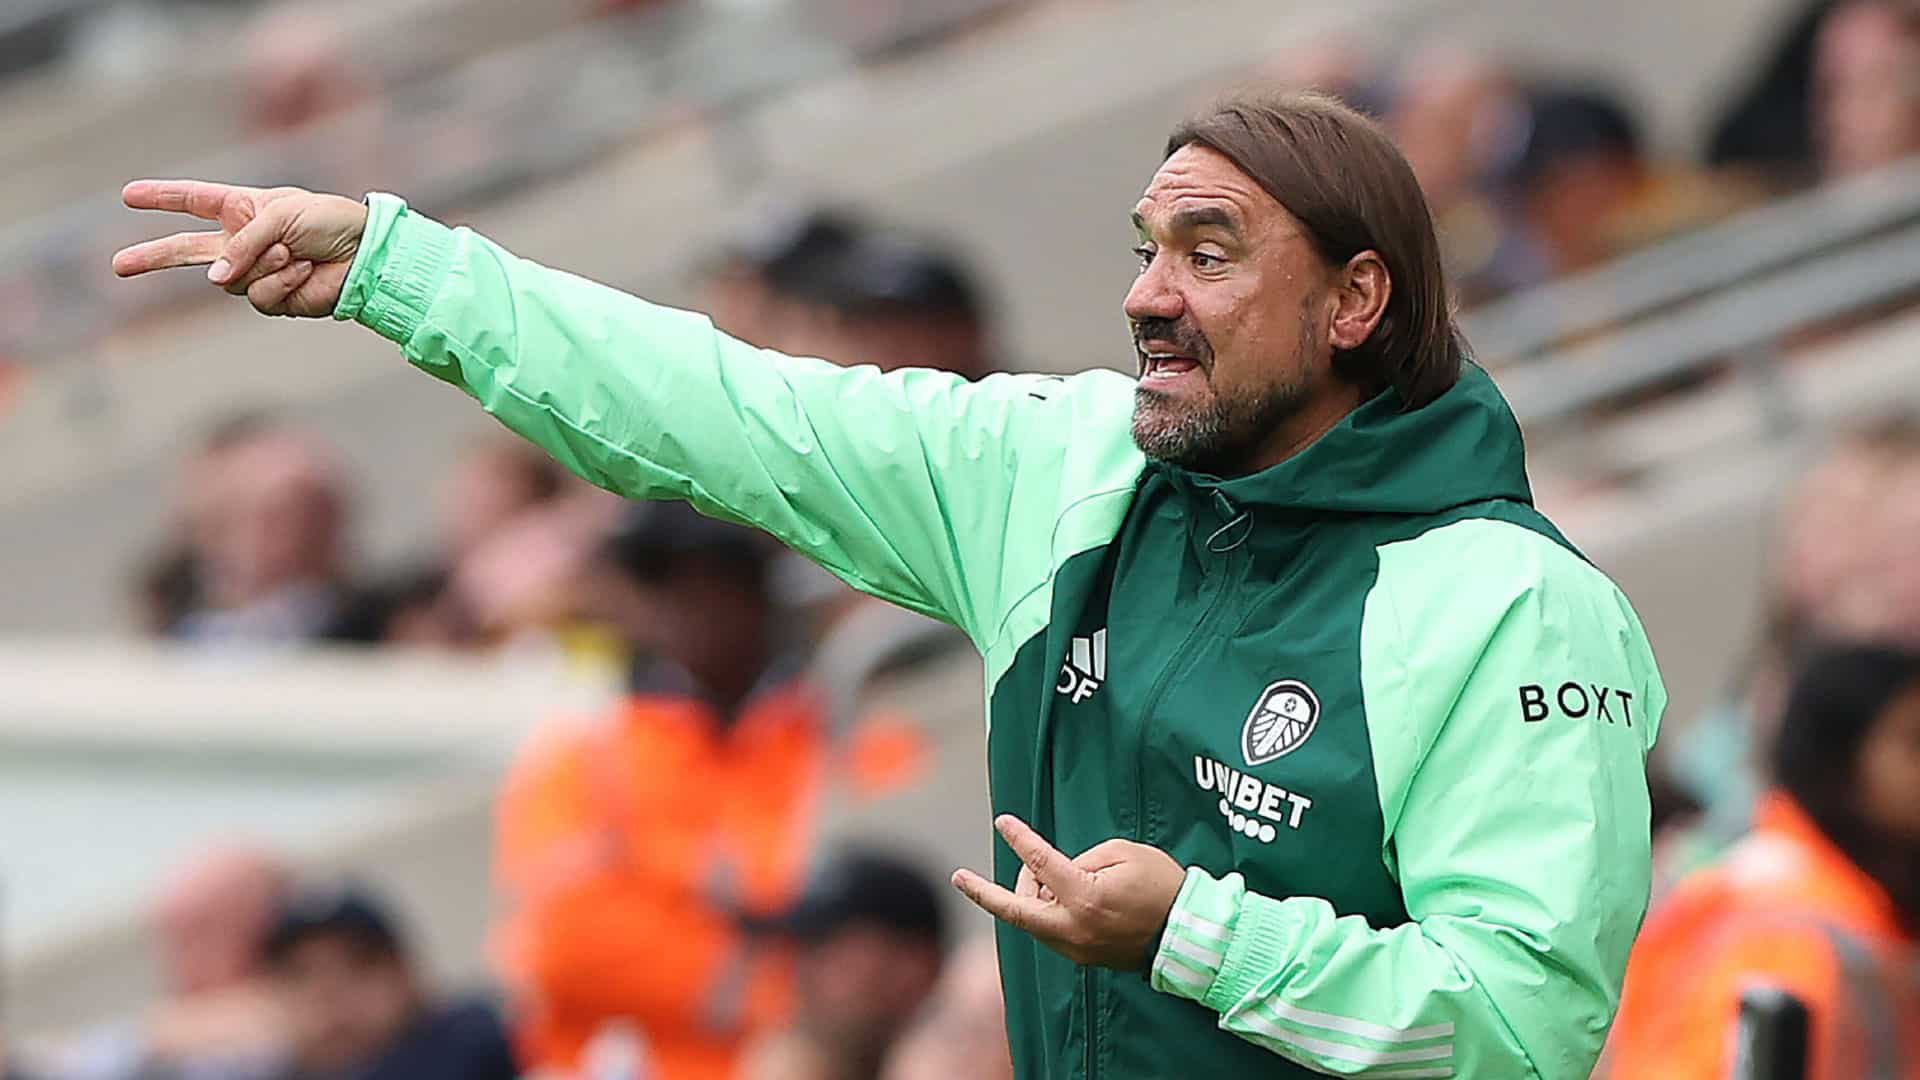 A photo of Daniel Farke in a mint green LUFC training jacket, giving instructions to his players